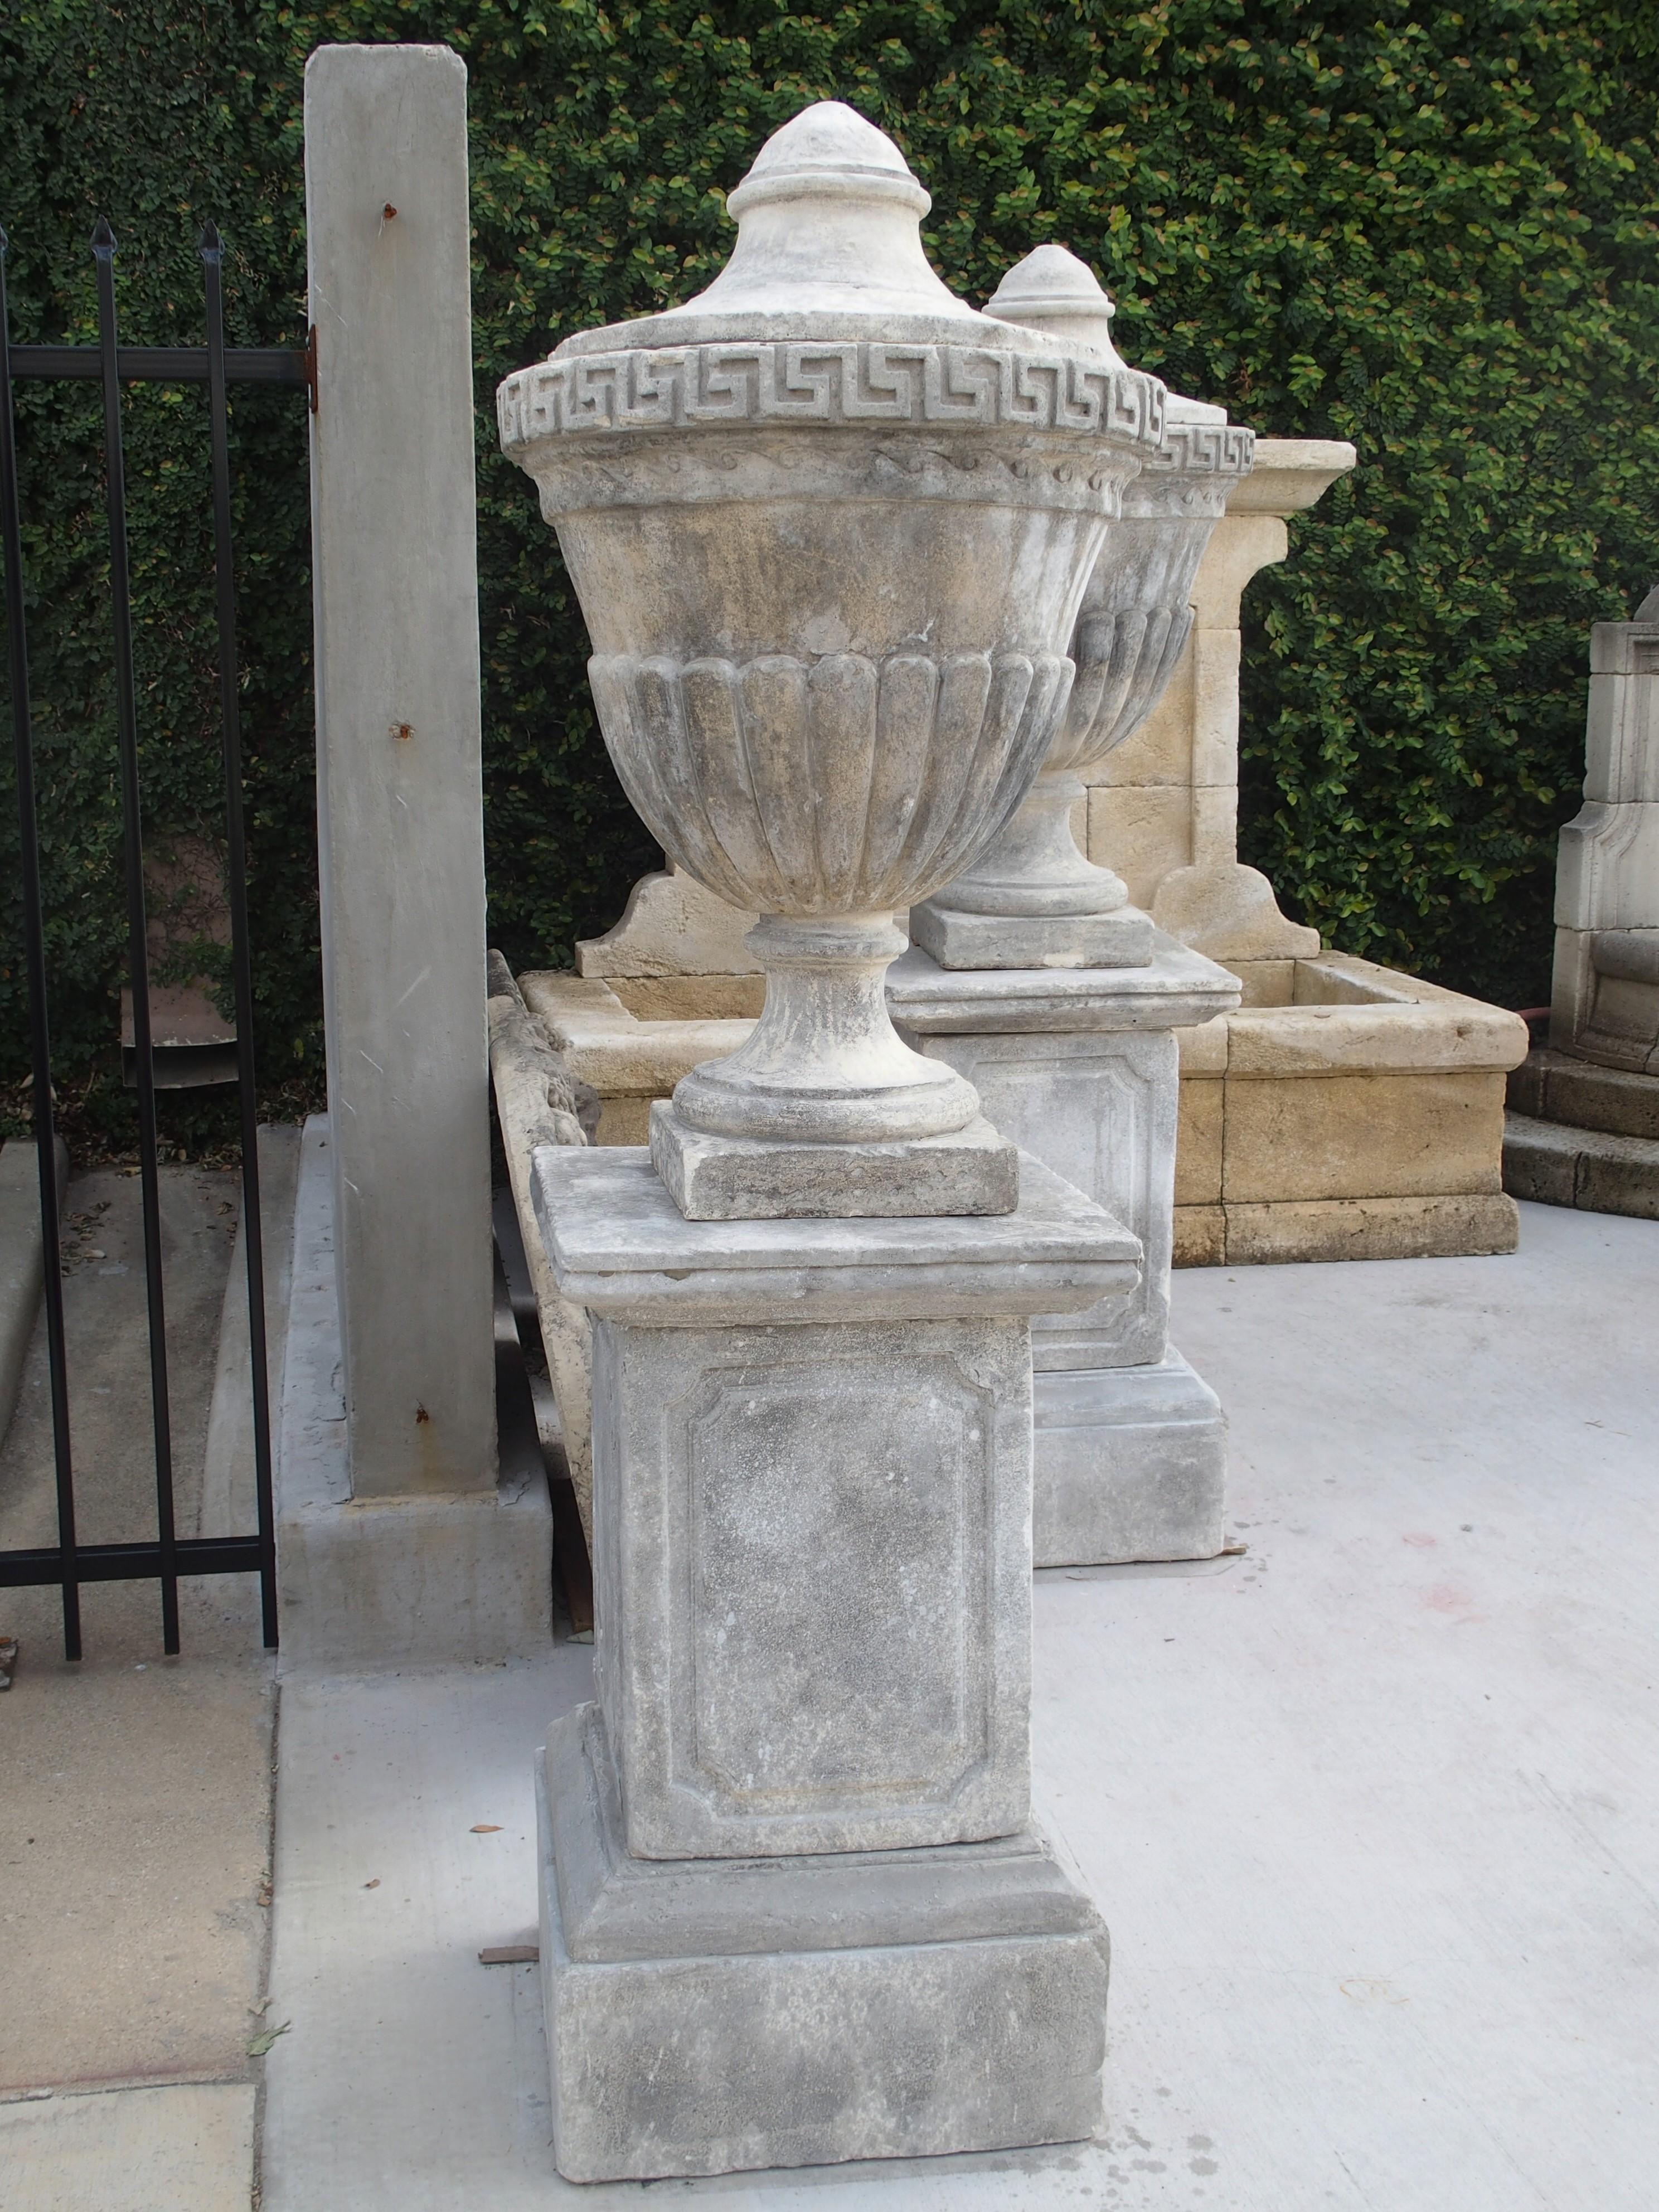 This pair of composition limestone urns on pedestals from Southern Italy Stand at six feet tall.

The body of the urns are decorated with several elements of Neoclassical motifs. Neoclassicism was inspired by the art and culture of ancient